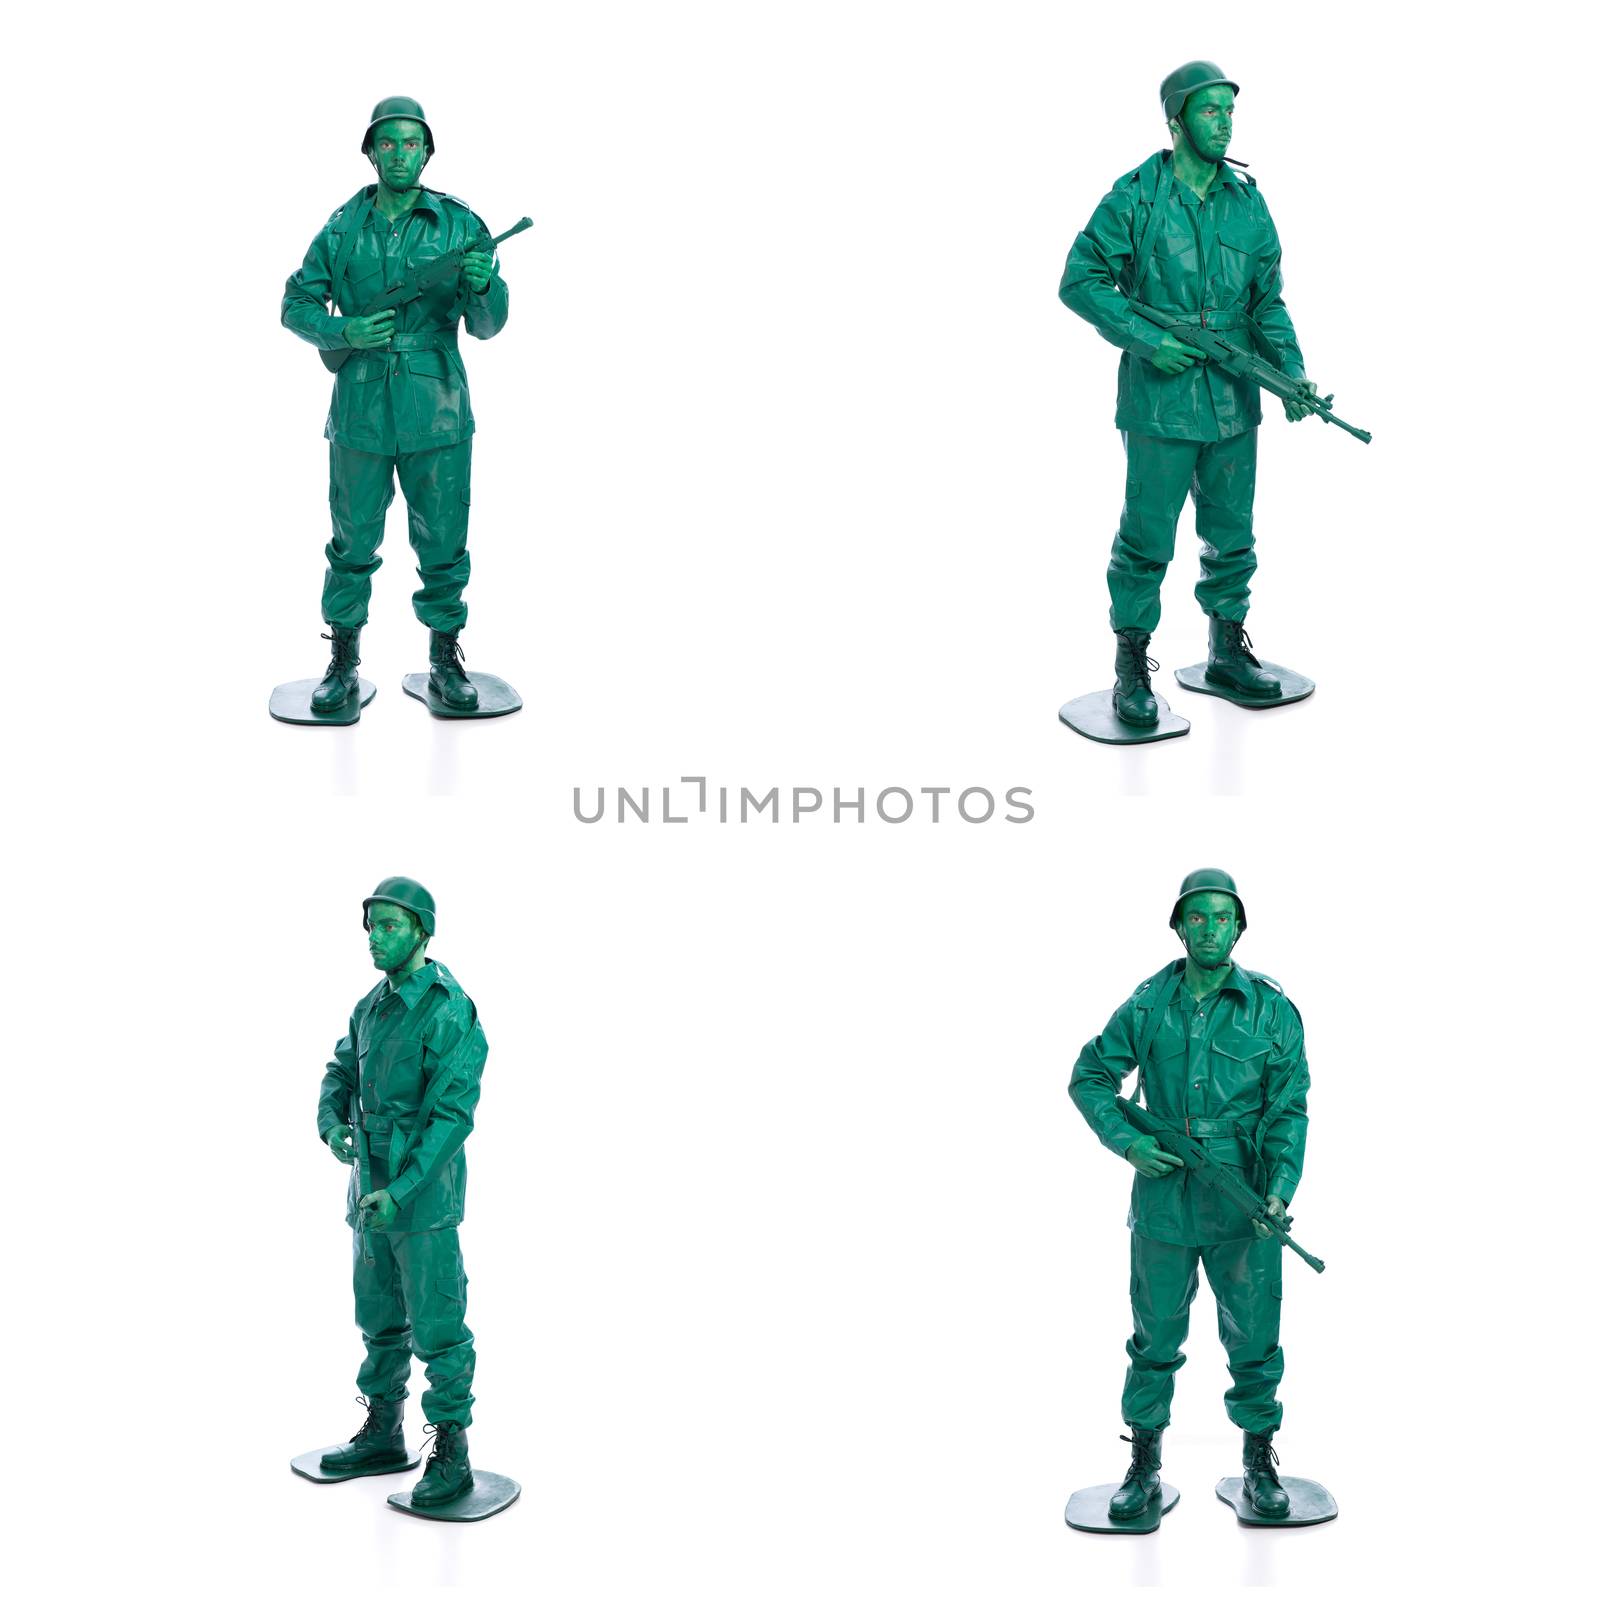 Four man on a green toy soldier costume standing with riffle isolated on white background.